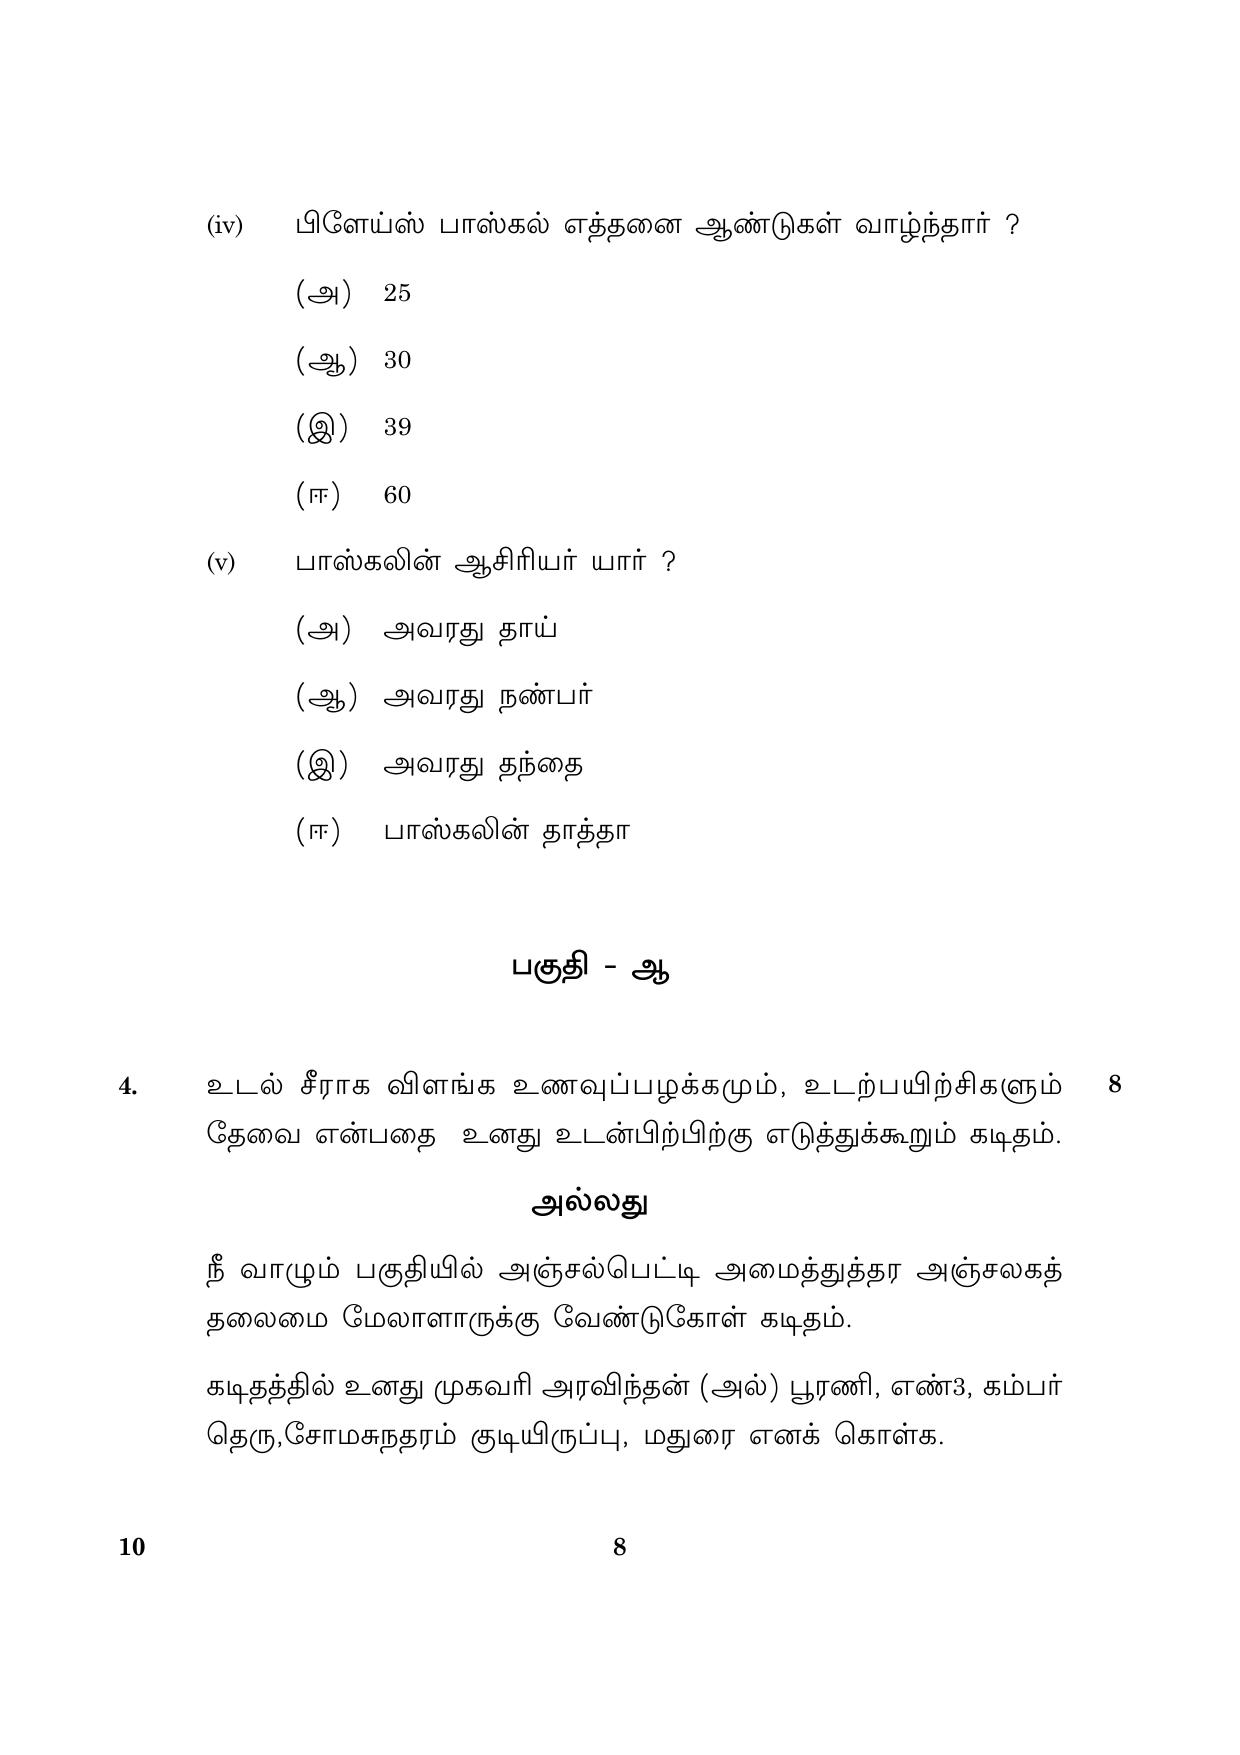 CBSE Class 10 010 Tamil 2016 Question Paper - Page 8